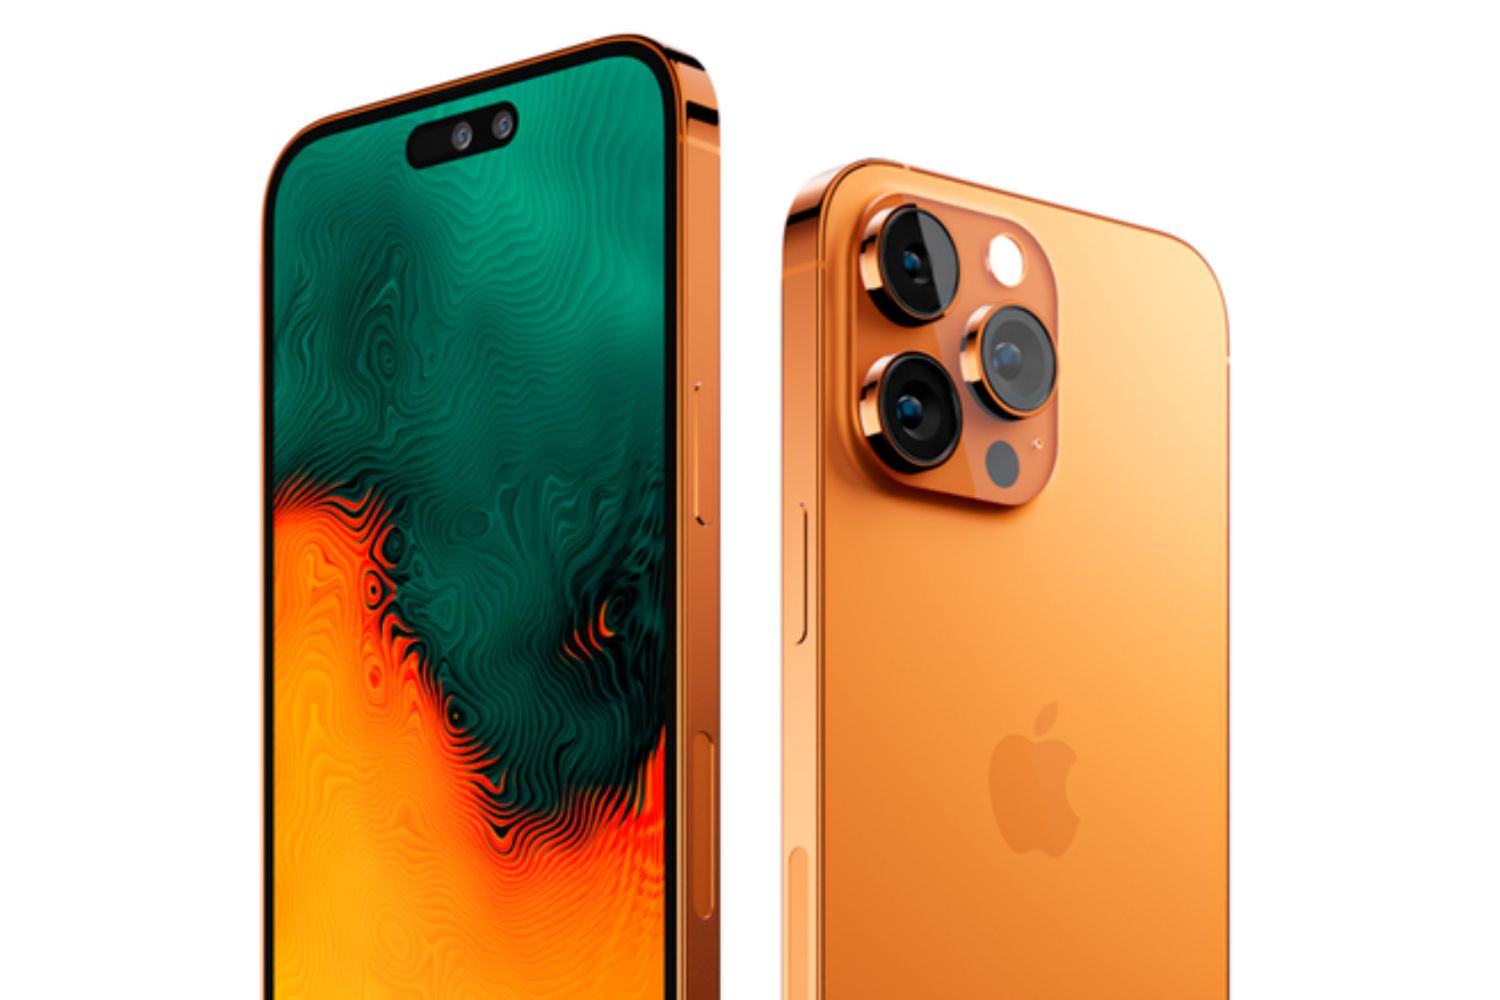 iphone 13 pro colors release date